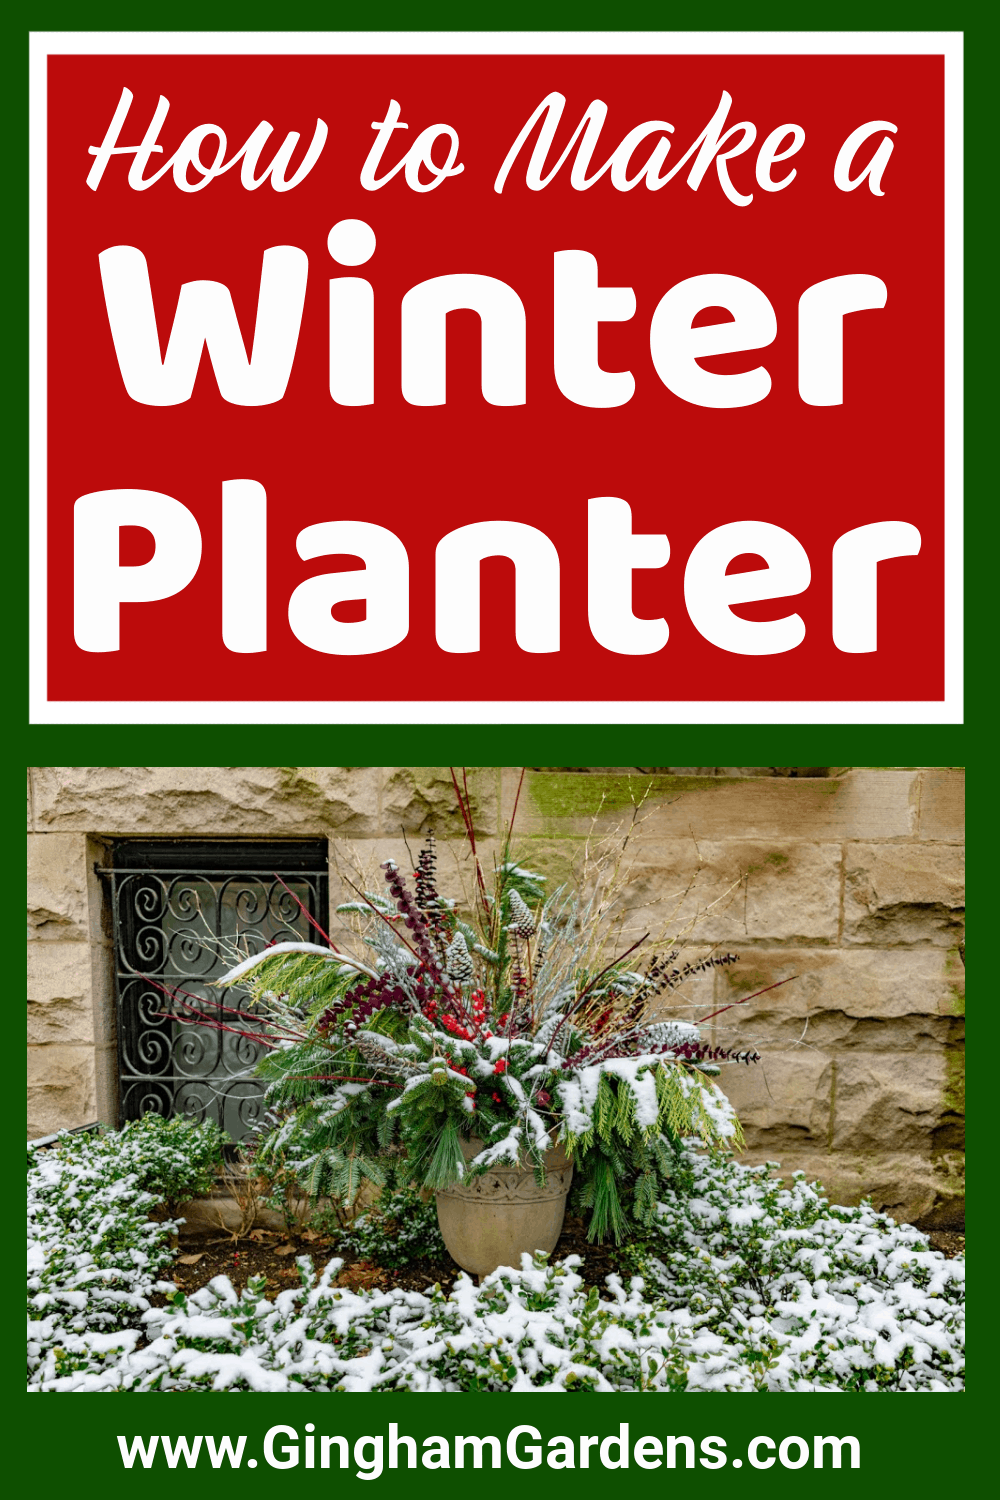 Image of a Winter Planter with Text Overlay - How to Make a Winter Planter